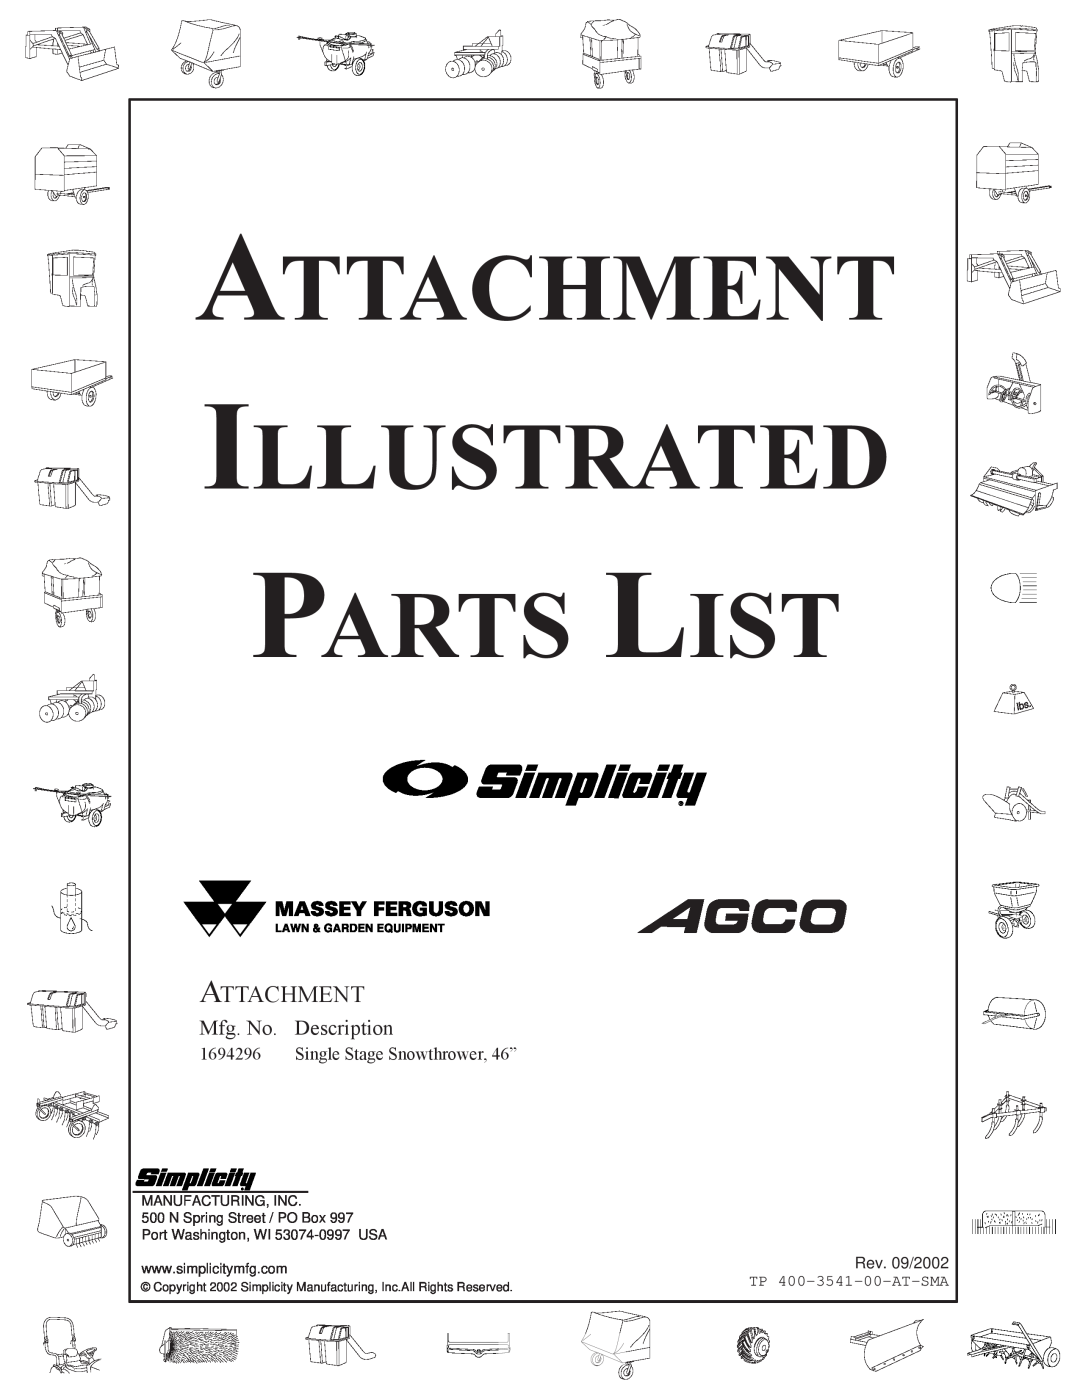 Simplicity 1694296 manual Attachment Illustrated Parts List, Mfg. No. Description, Single Stage Snowthrower, 46” 